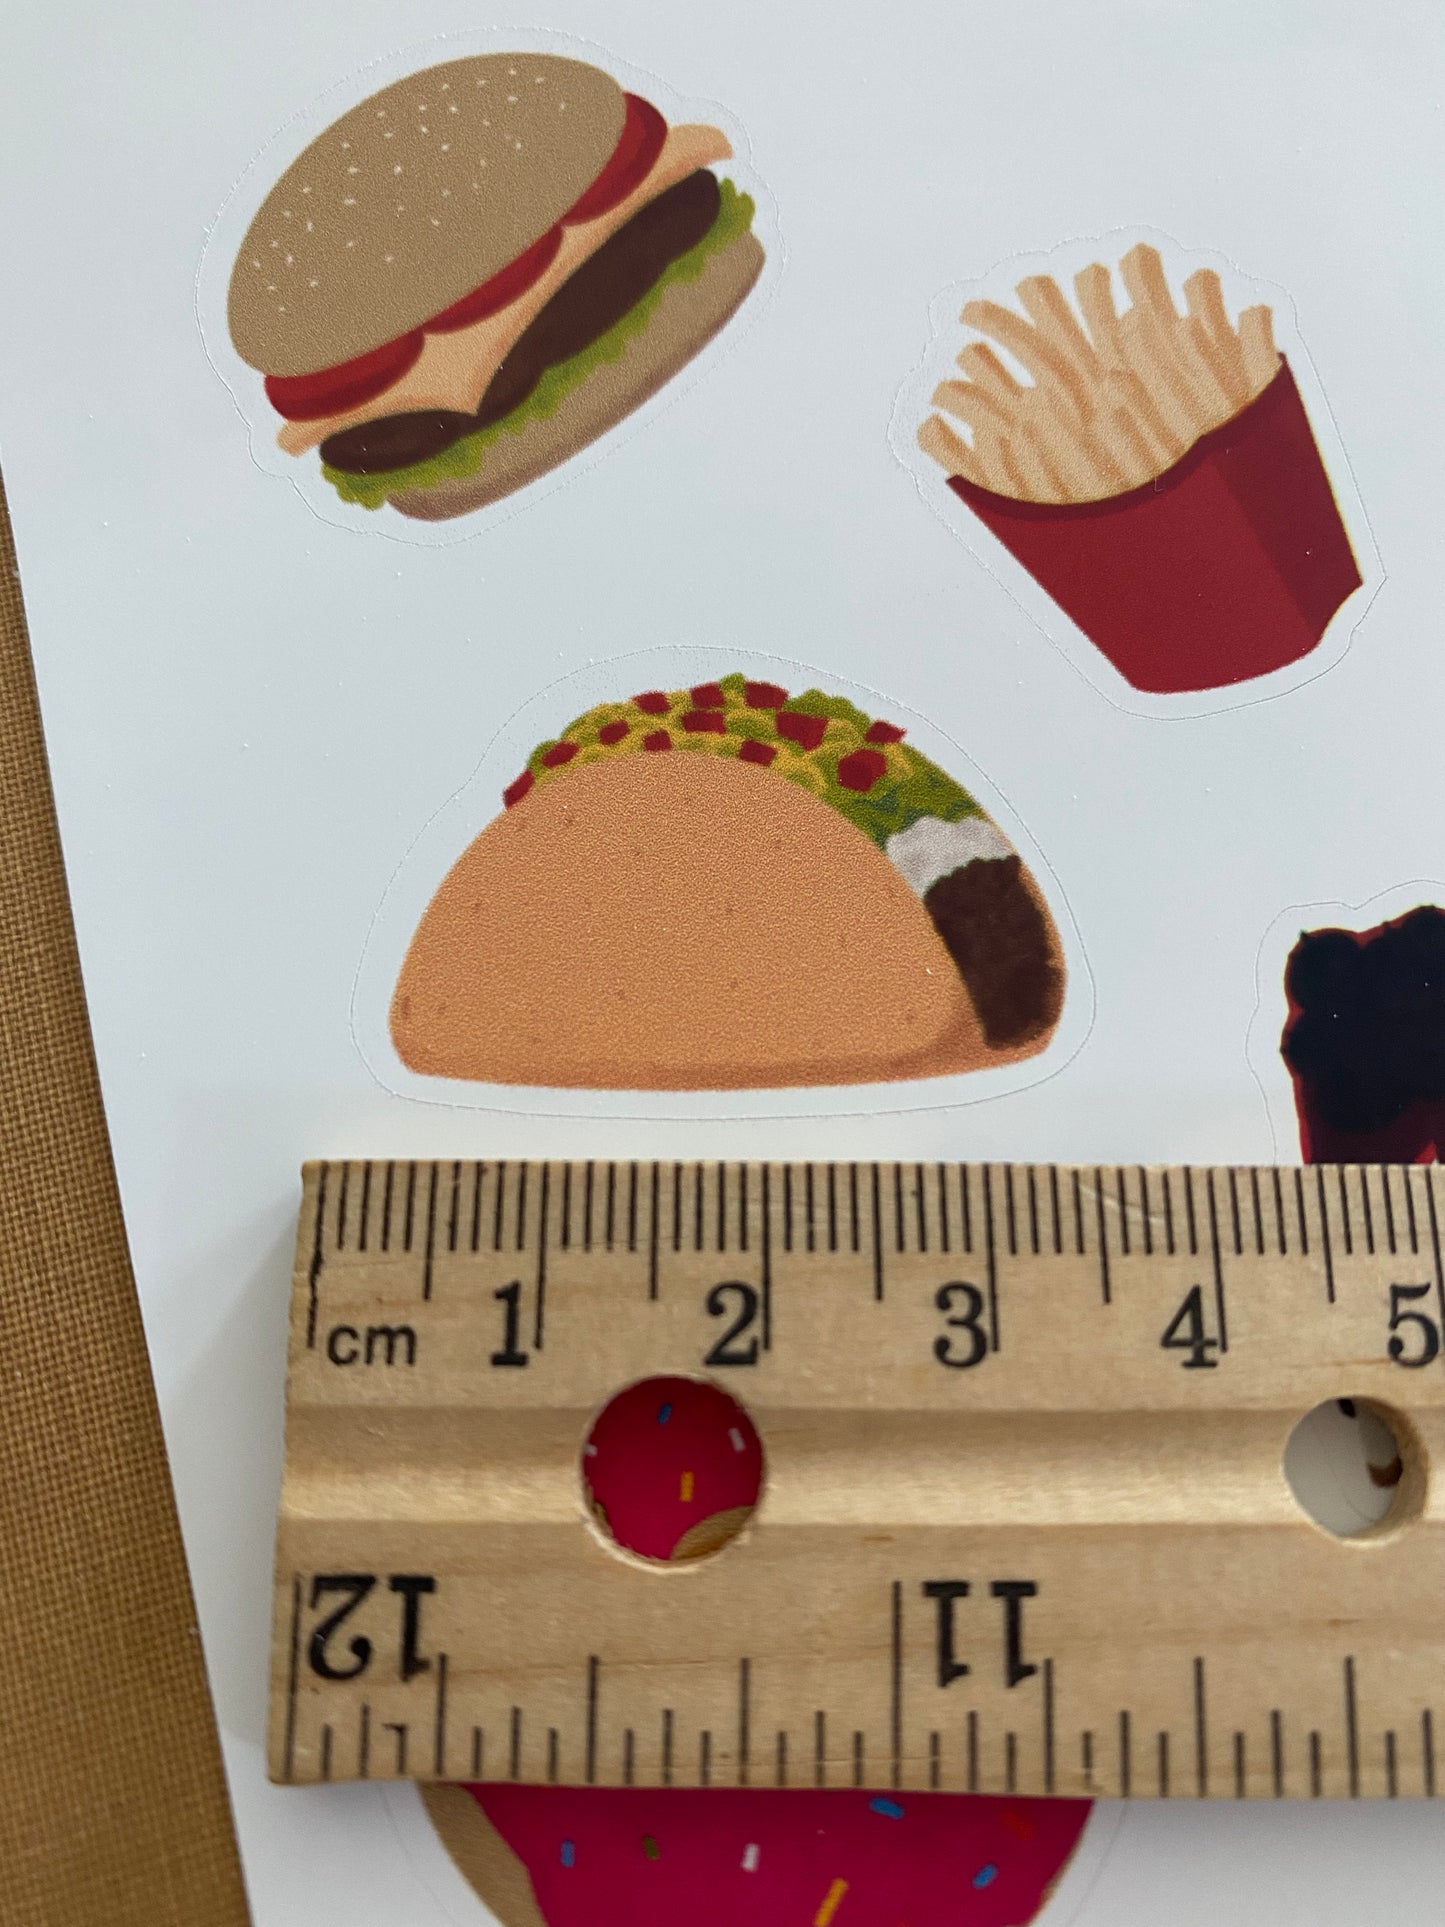 Showing the size of each journal sticker. It shows a ruler underneath the tacos sticker